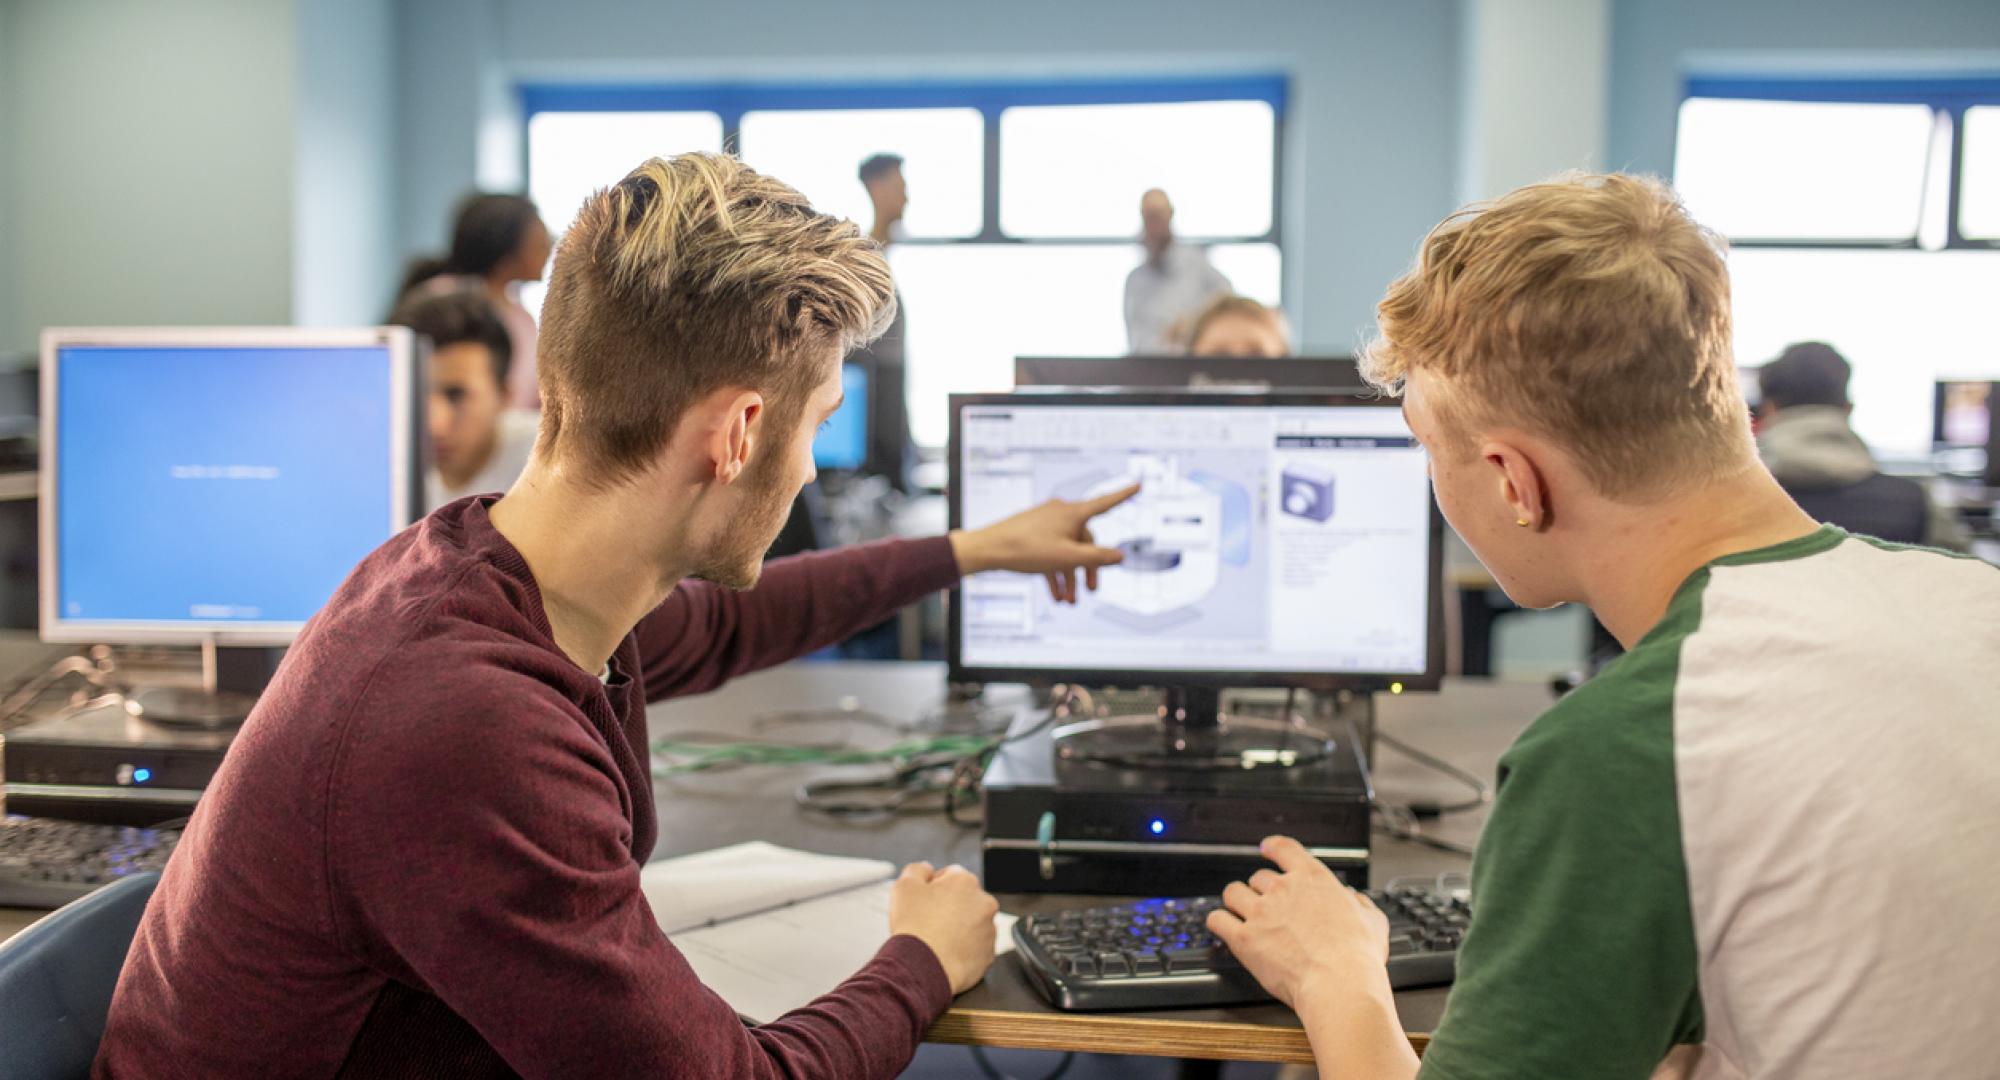 Two young men work together on a project on a computer